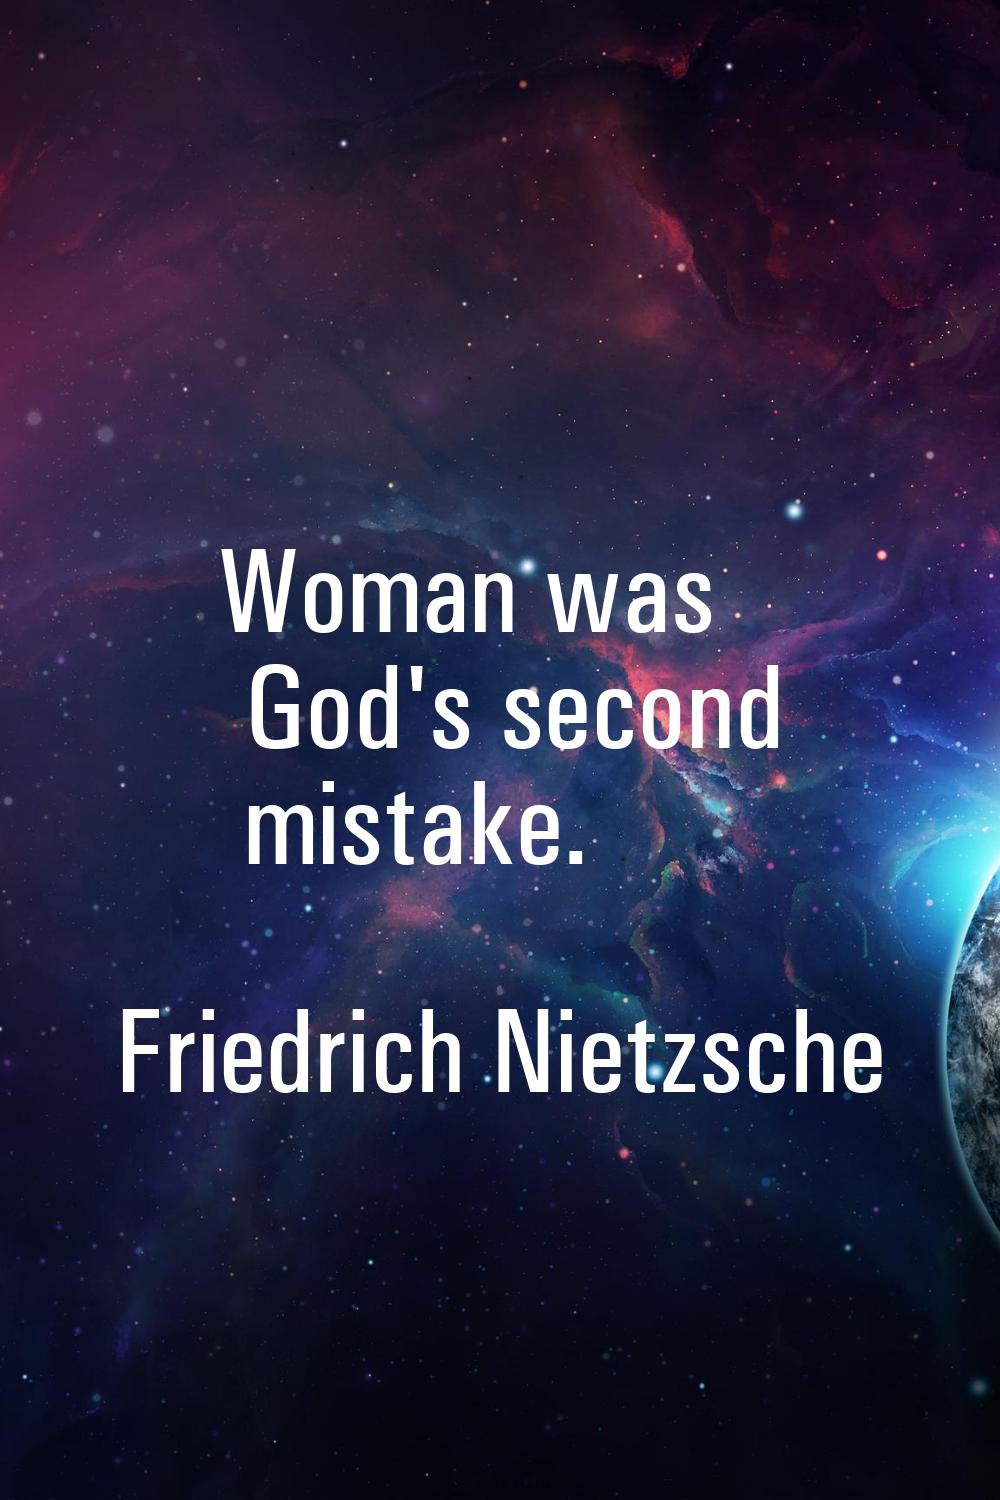 Woman was God's second mistake.